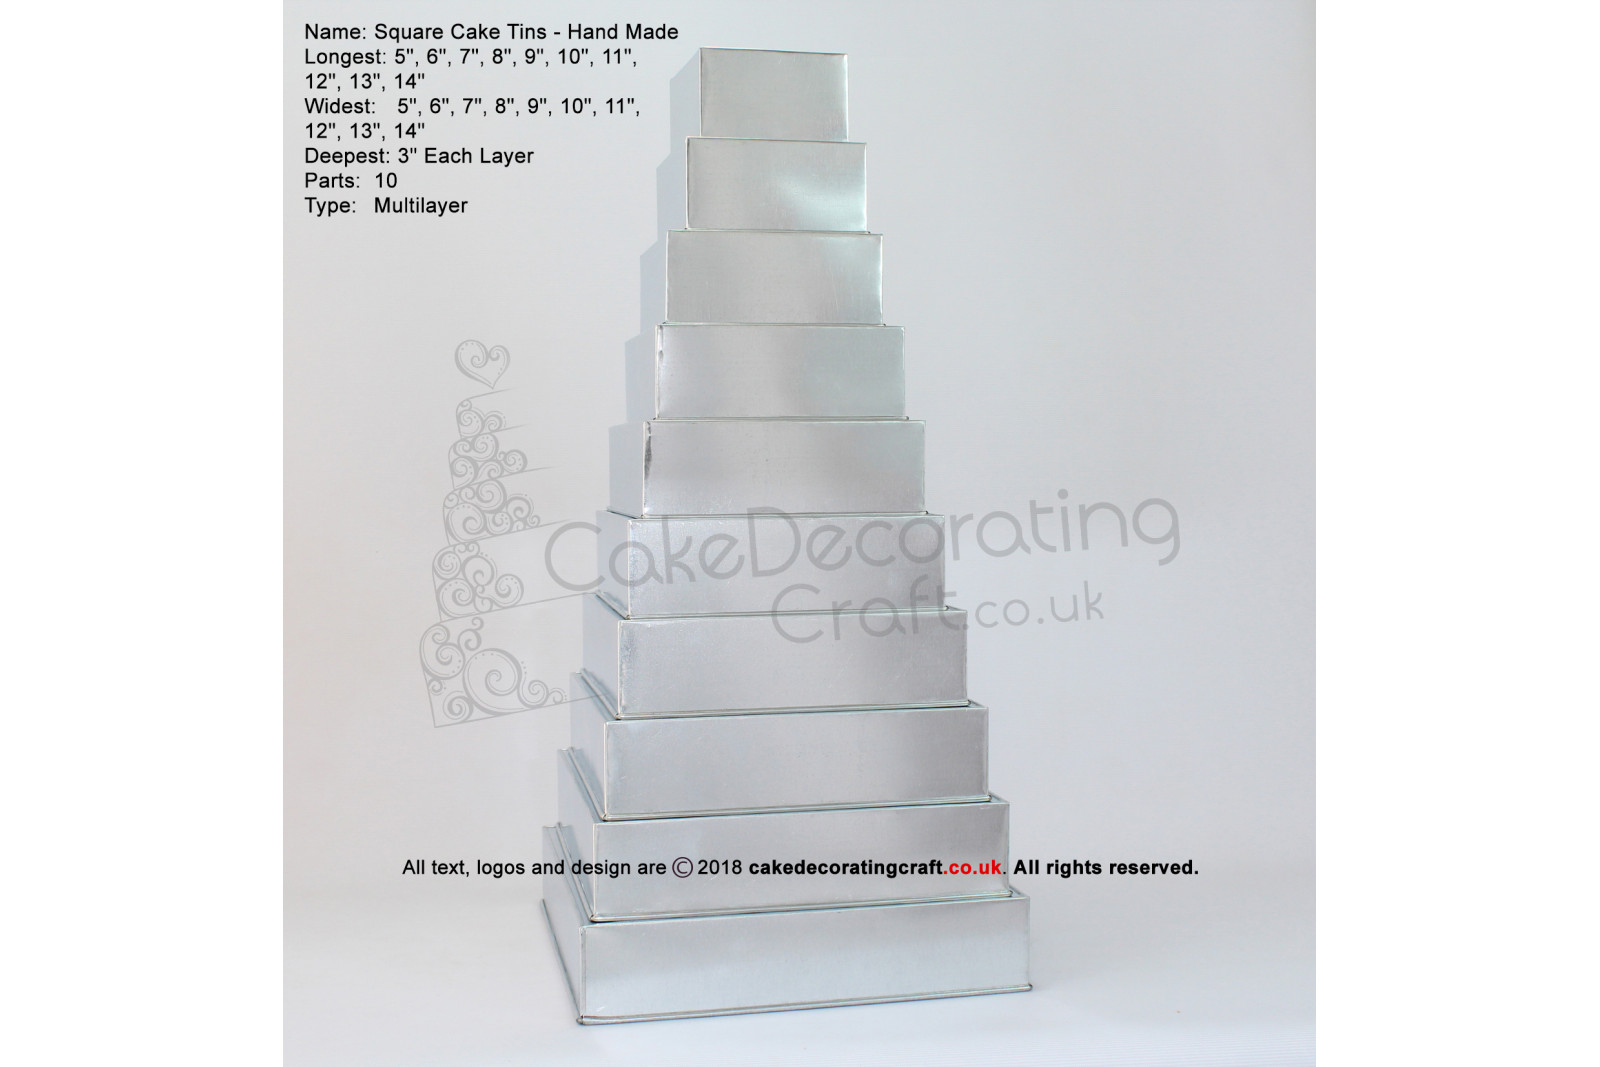 Square Cake Baking Tin | 3" Deep | Size 5 6 7 8 9 10 11 12 13 14 " | 10 Tiers | Hand Made